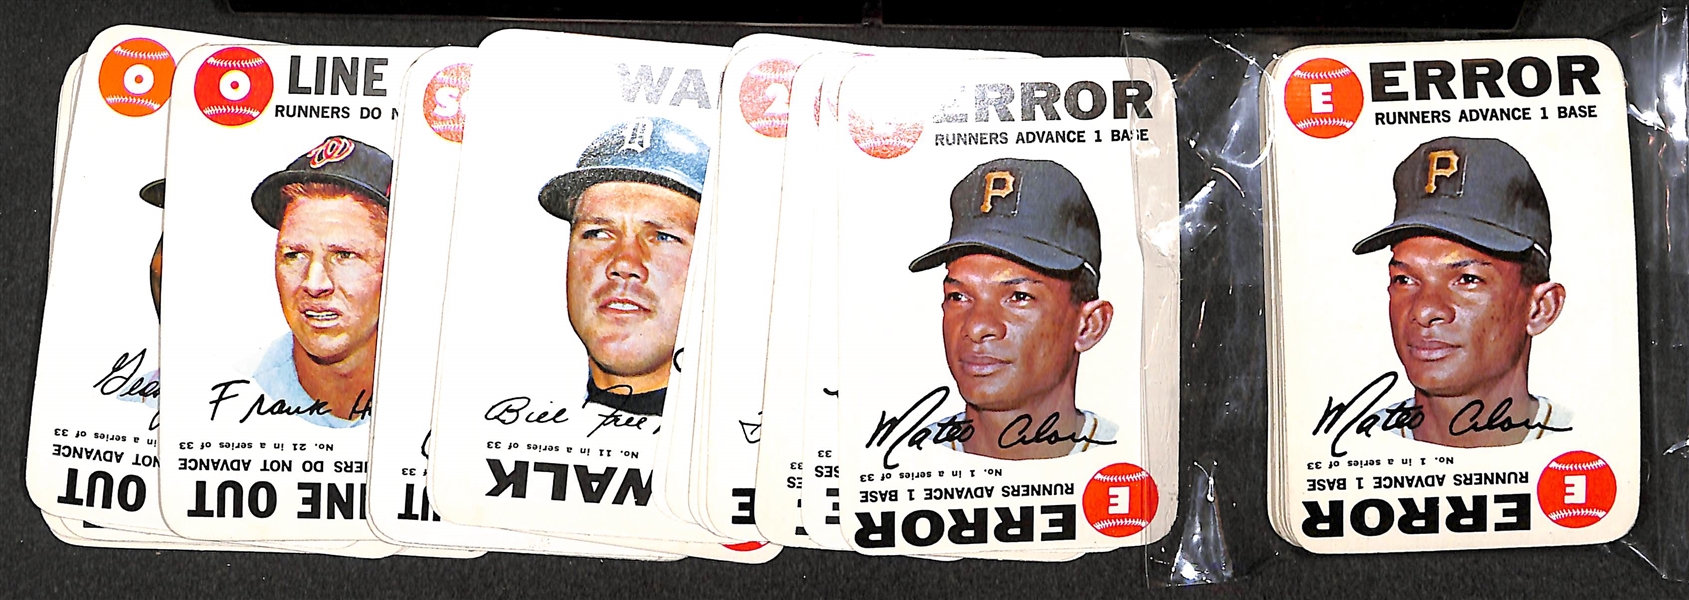 Lot of 2 - 1968 Topps Game Card Sets & 3 - 1970 Story Booklet Sets, as well as 100+ Additional Topps Game Cards